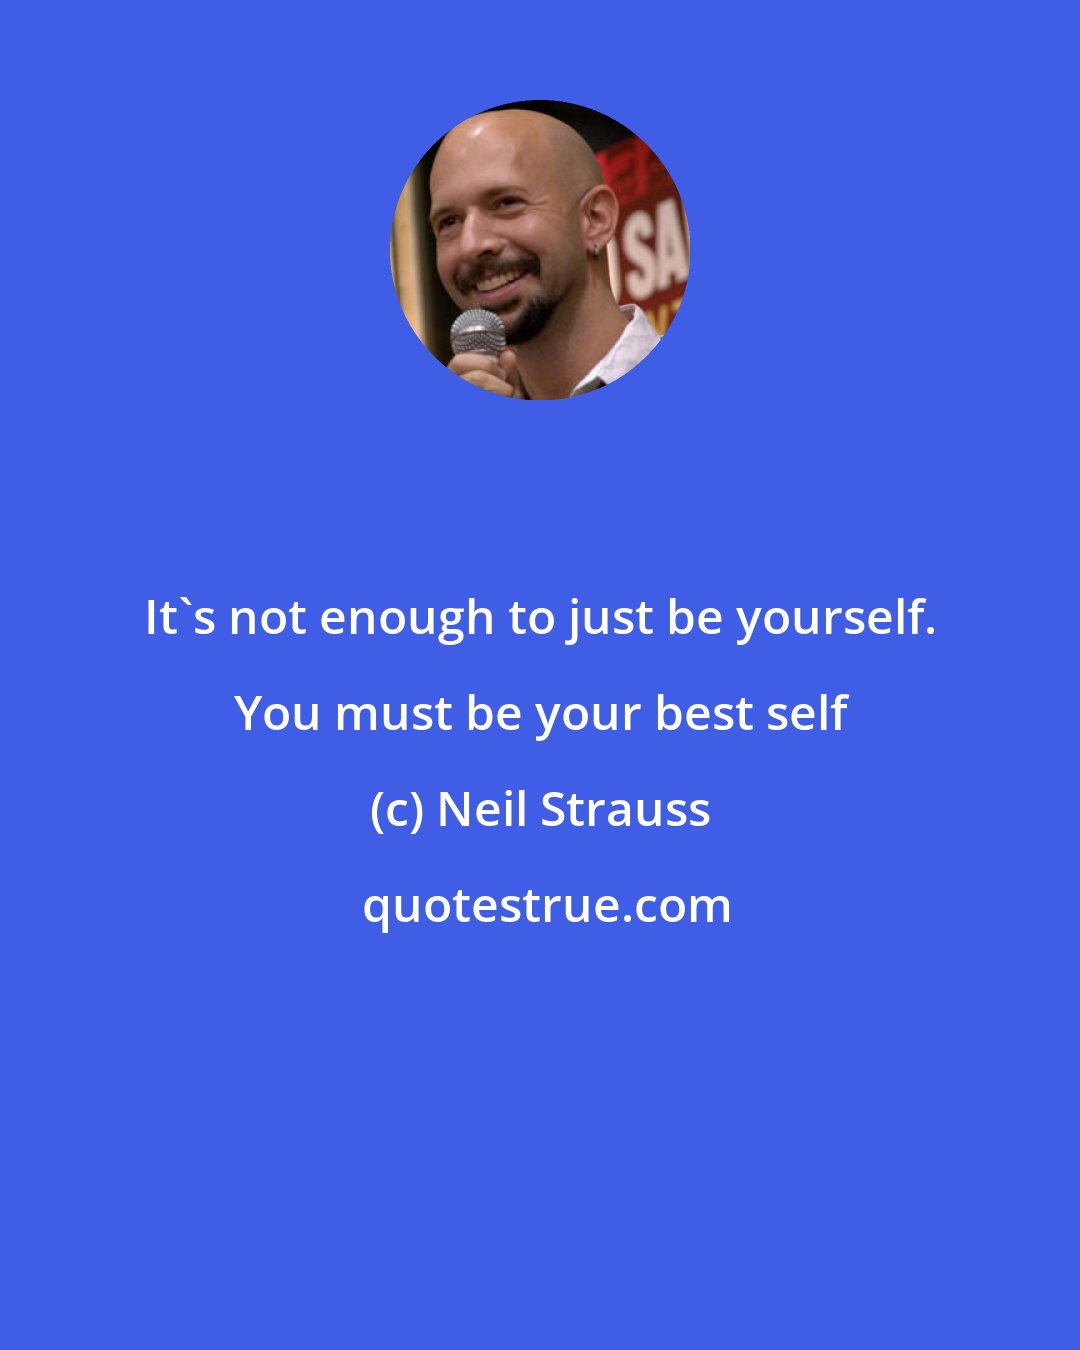 Neil Strauss: It's not enough to just be yourself. You must be your best self